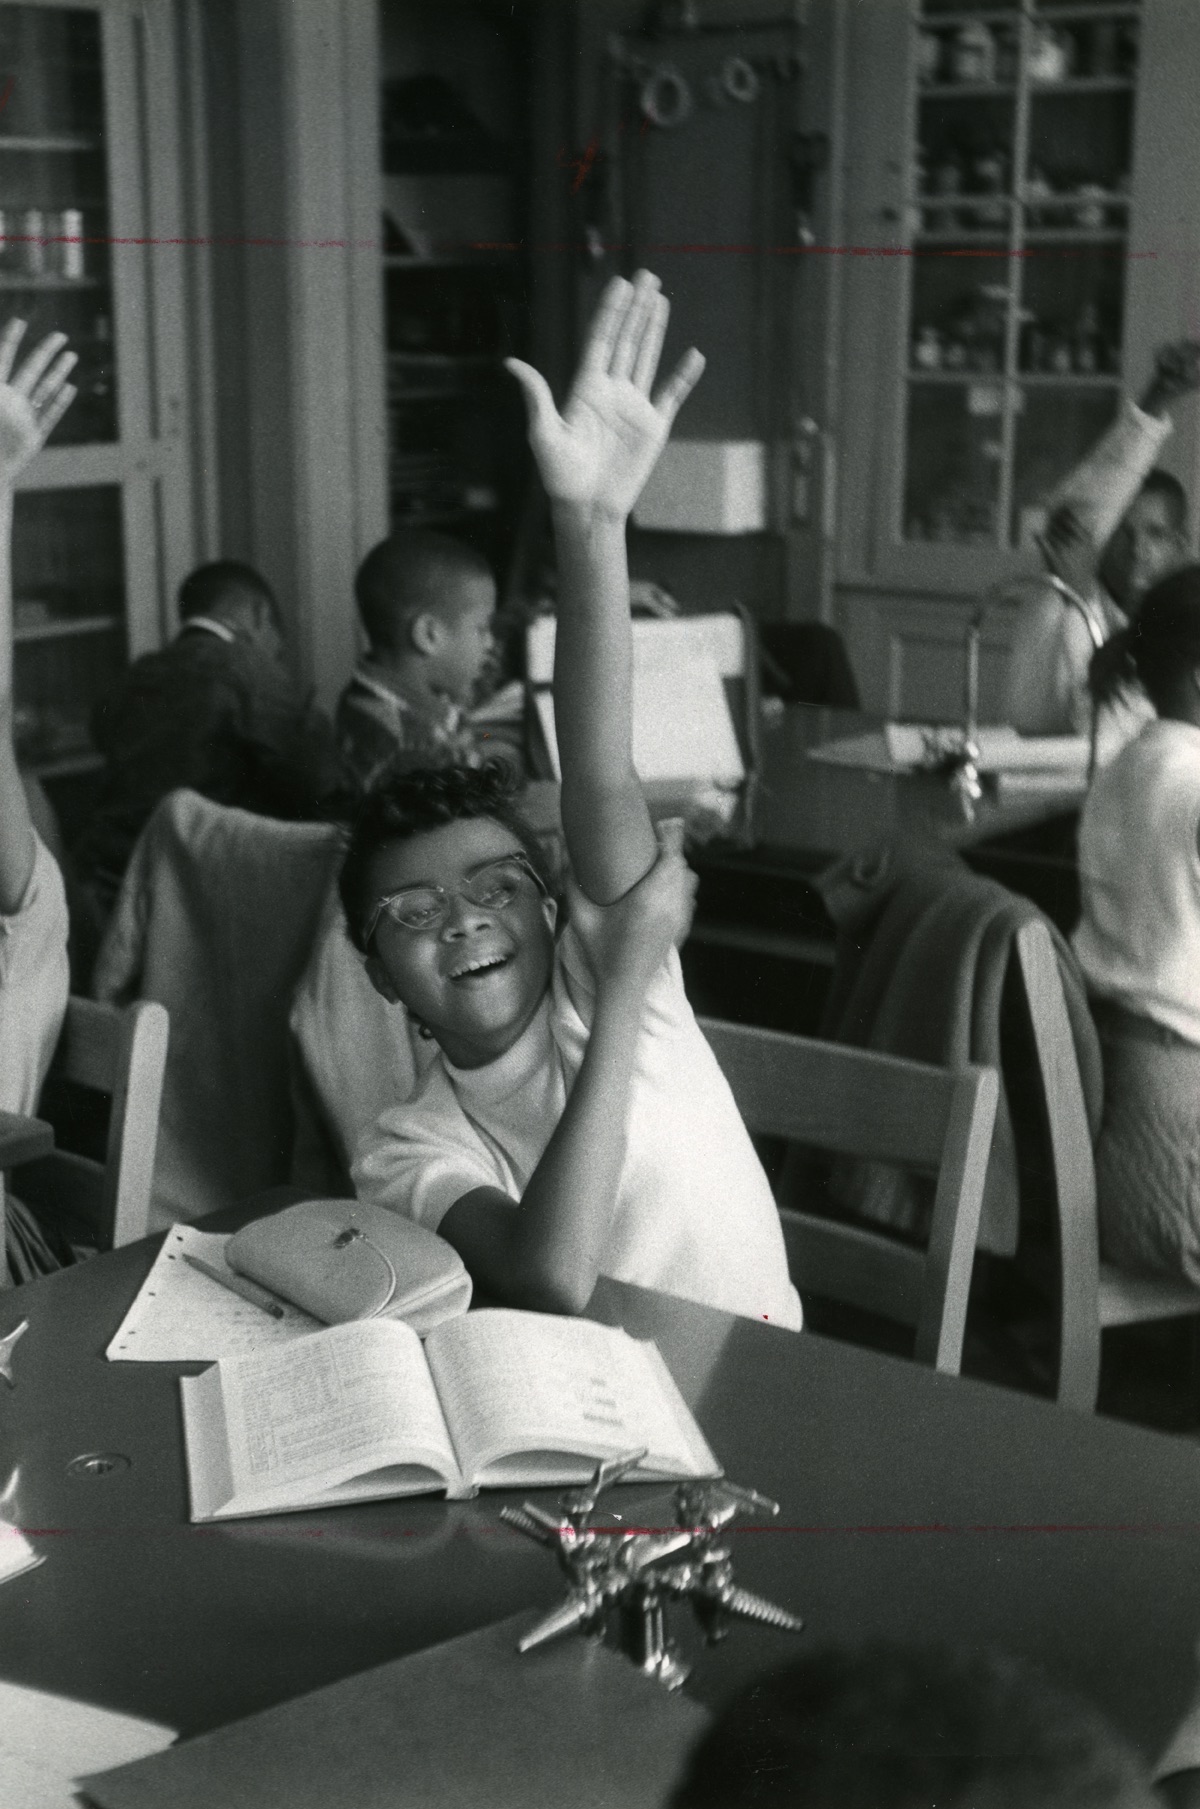 Female student raising her hand in a science classroom at Hoffman-Boston school, 1950s. Source: Center for Local History, Arlington Public Library.